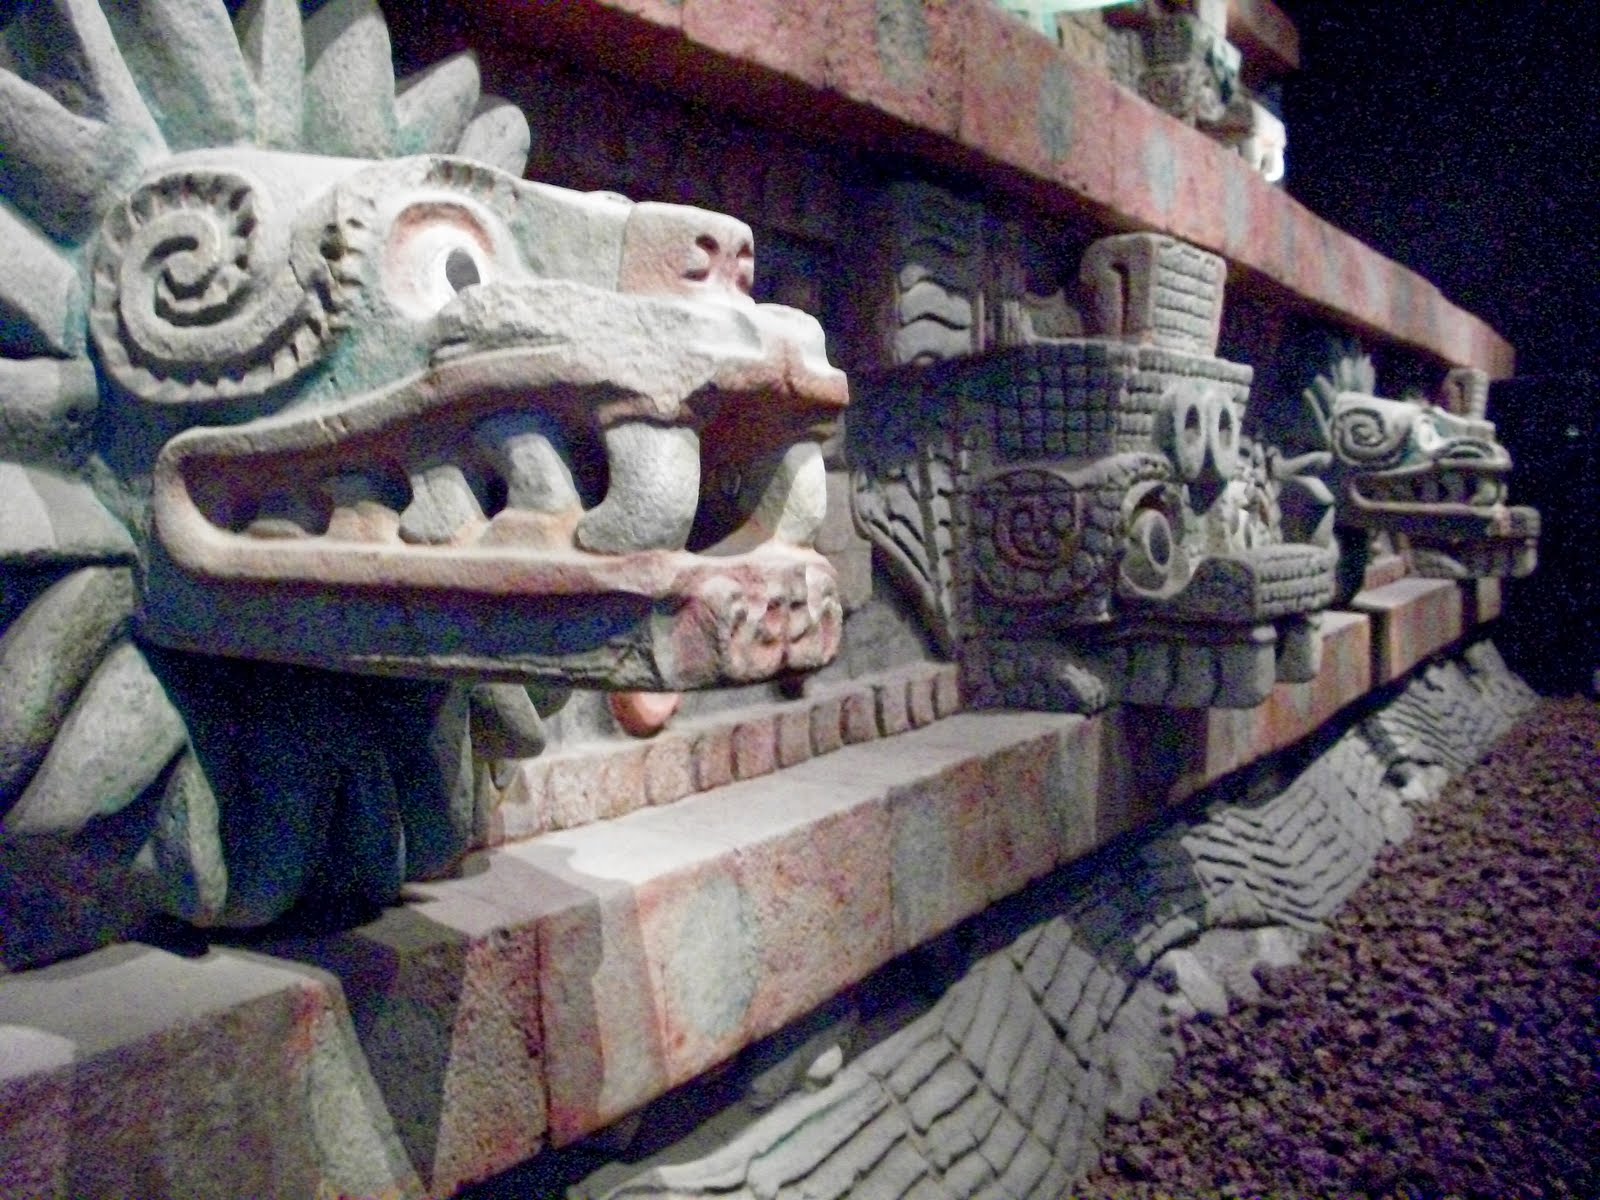 Large Aztec building with statues and faces incorporated into the structure.